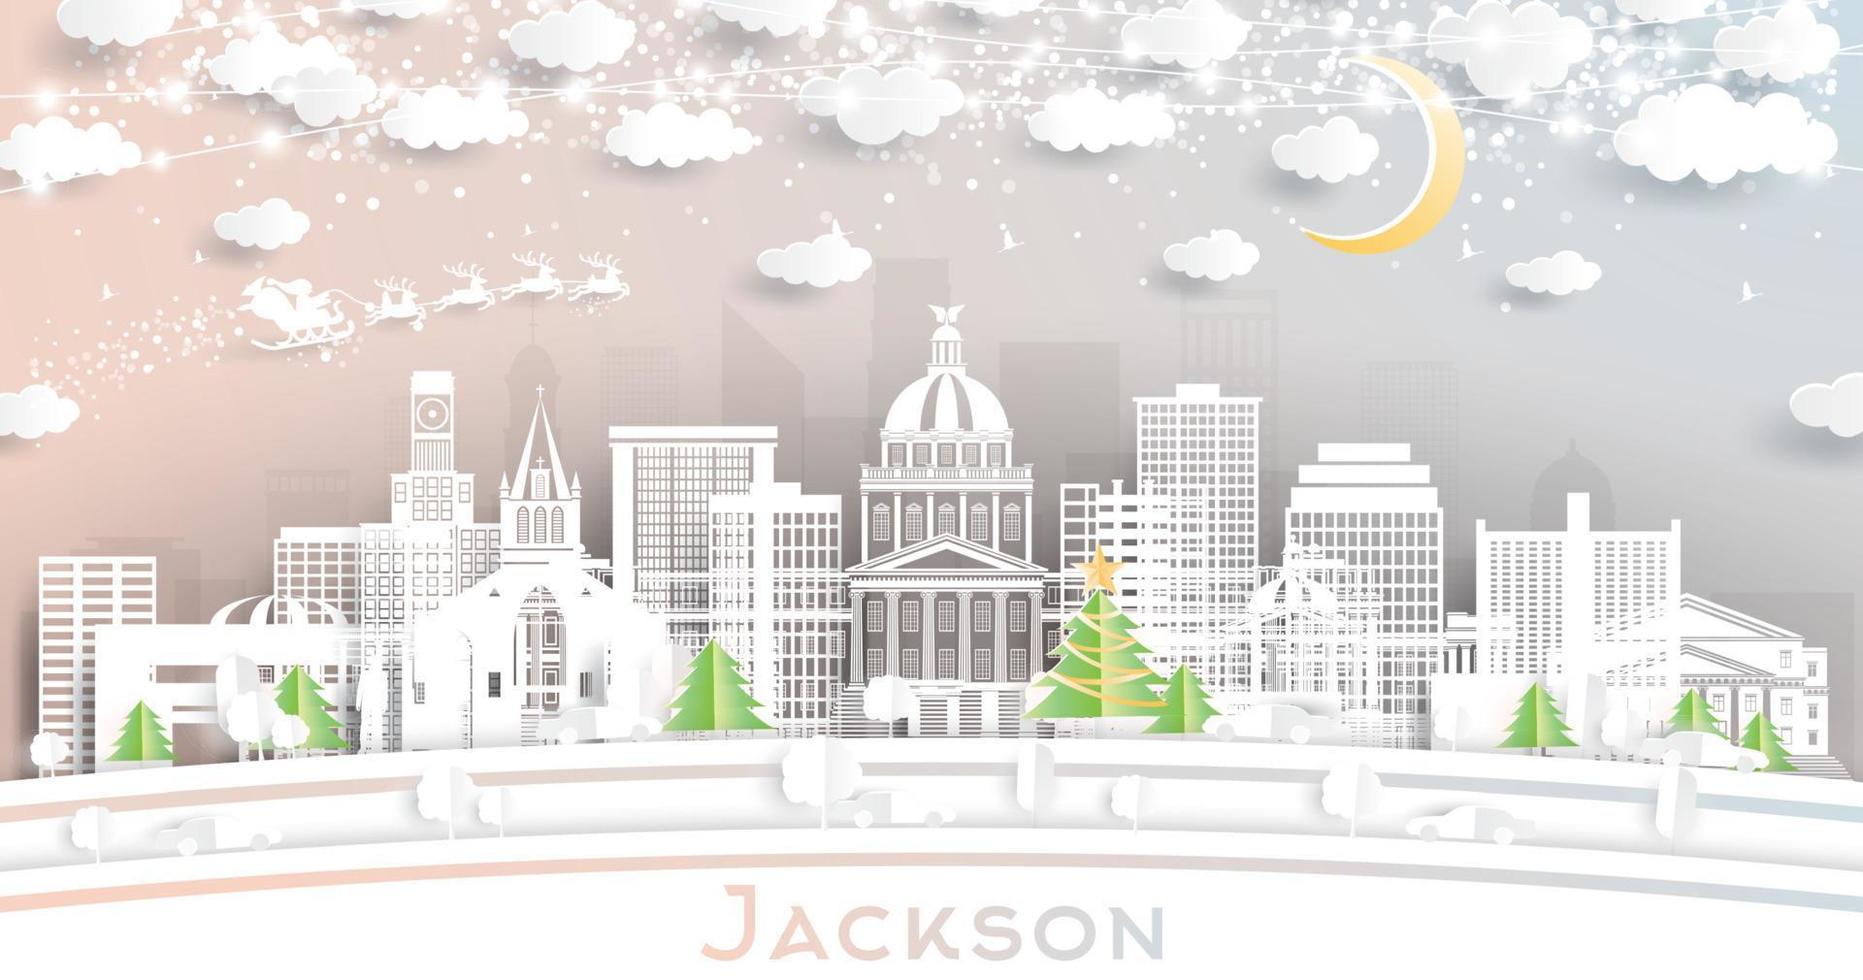 Jackson Mississippi City Skyline in Paper Cut Style with Snowflakes, Moon and Neon Garland. vector